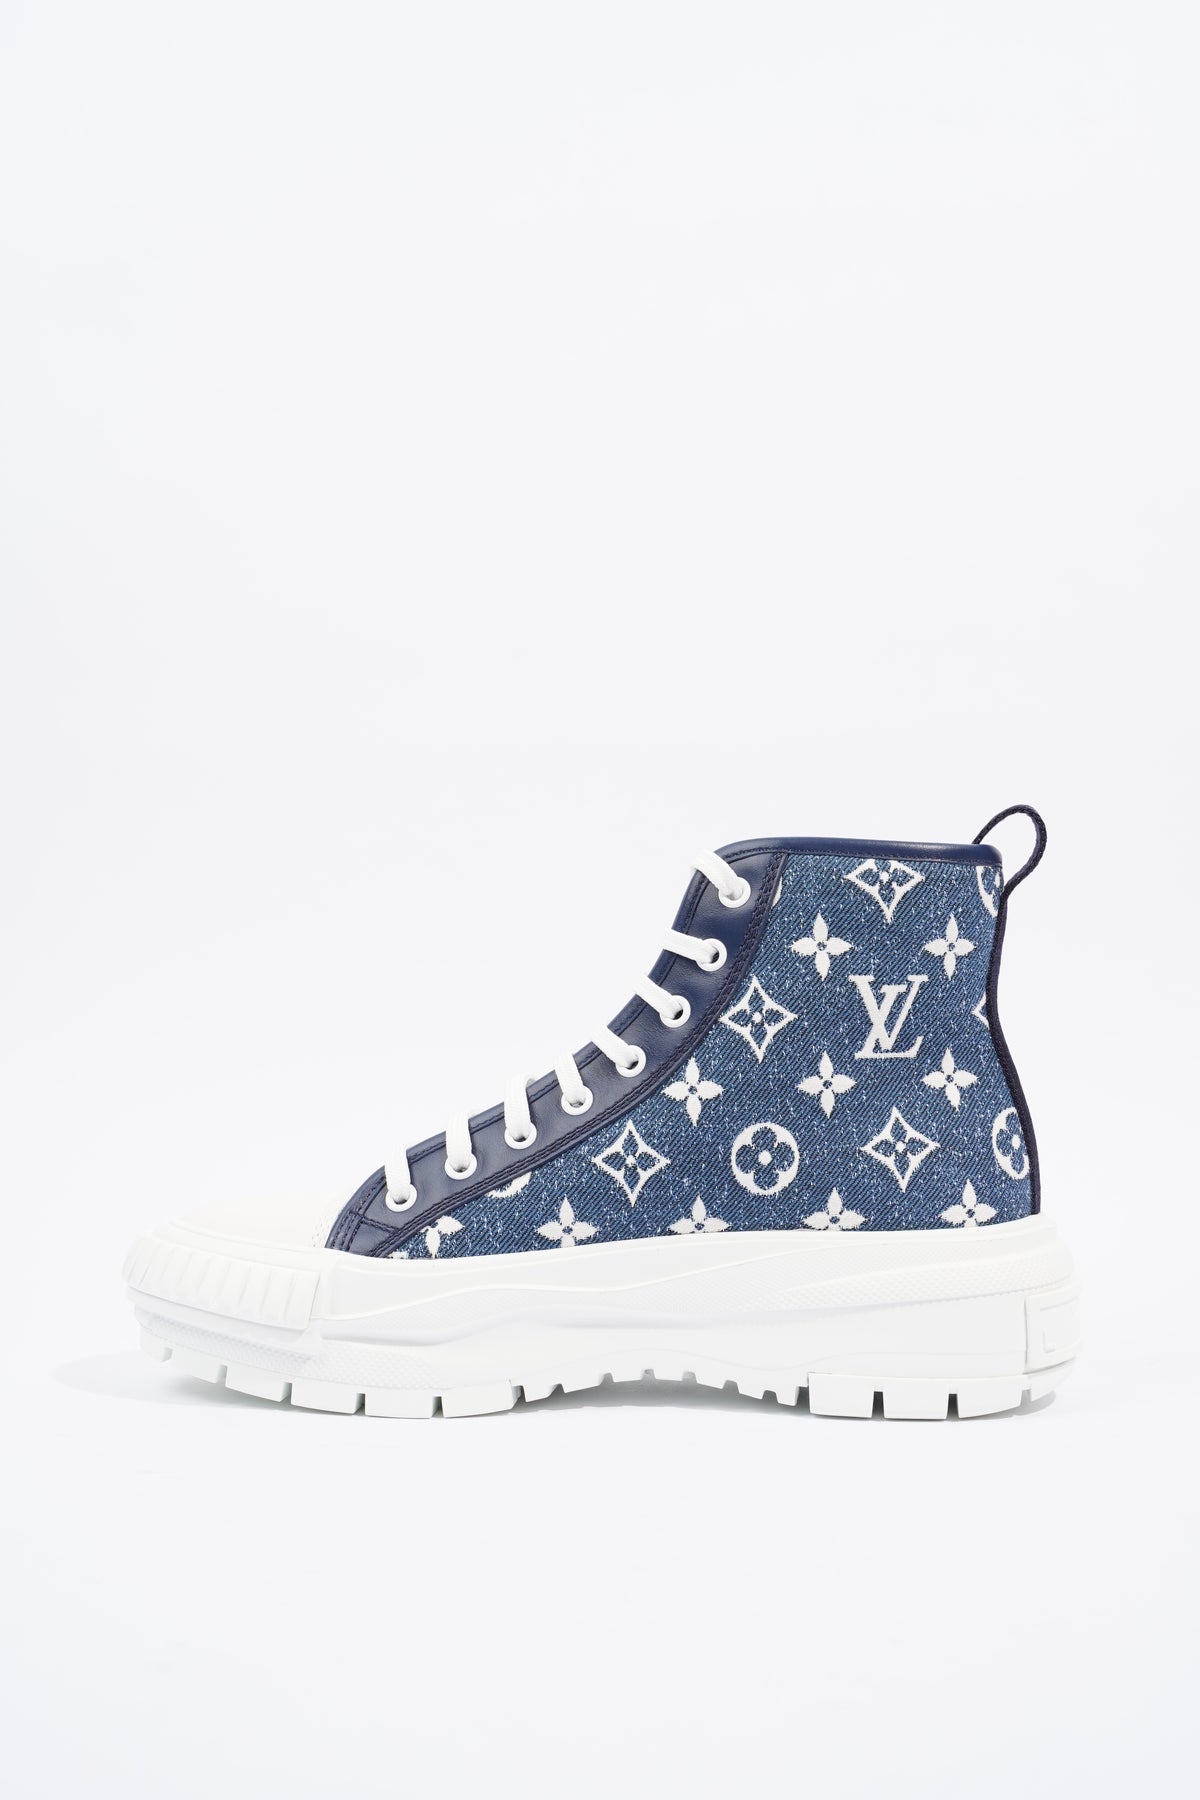 LV Squad Trainer Boots - OBSOLETES DO NOT TOUCH 1AACV6